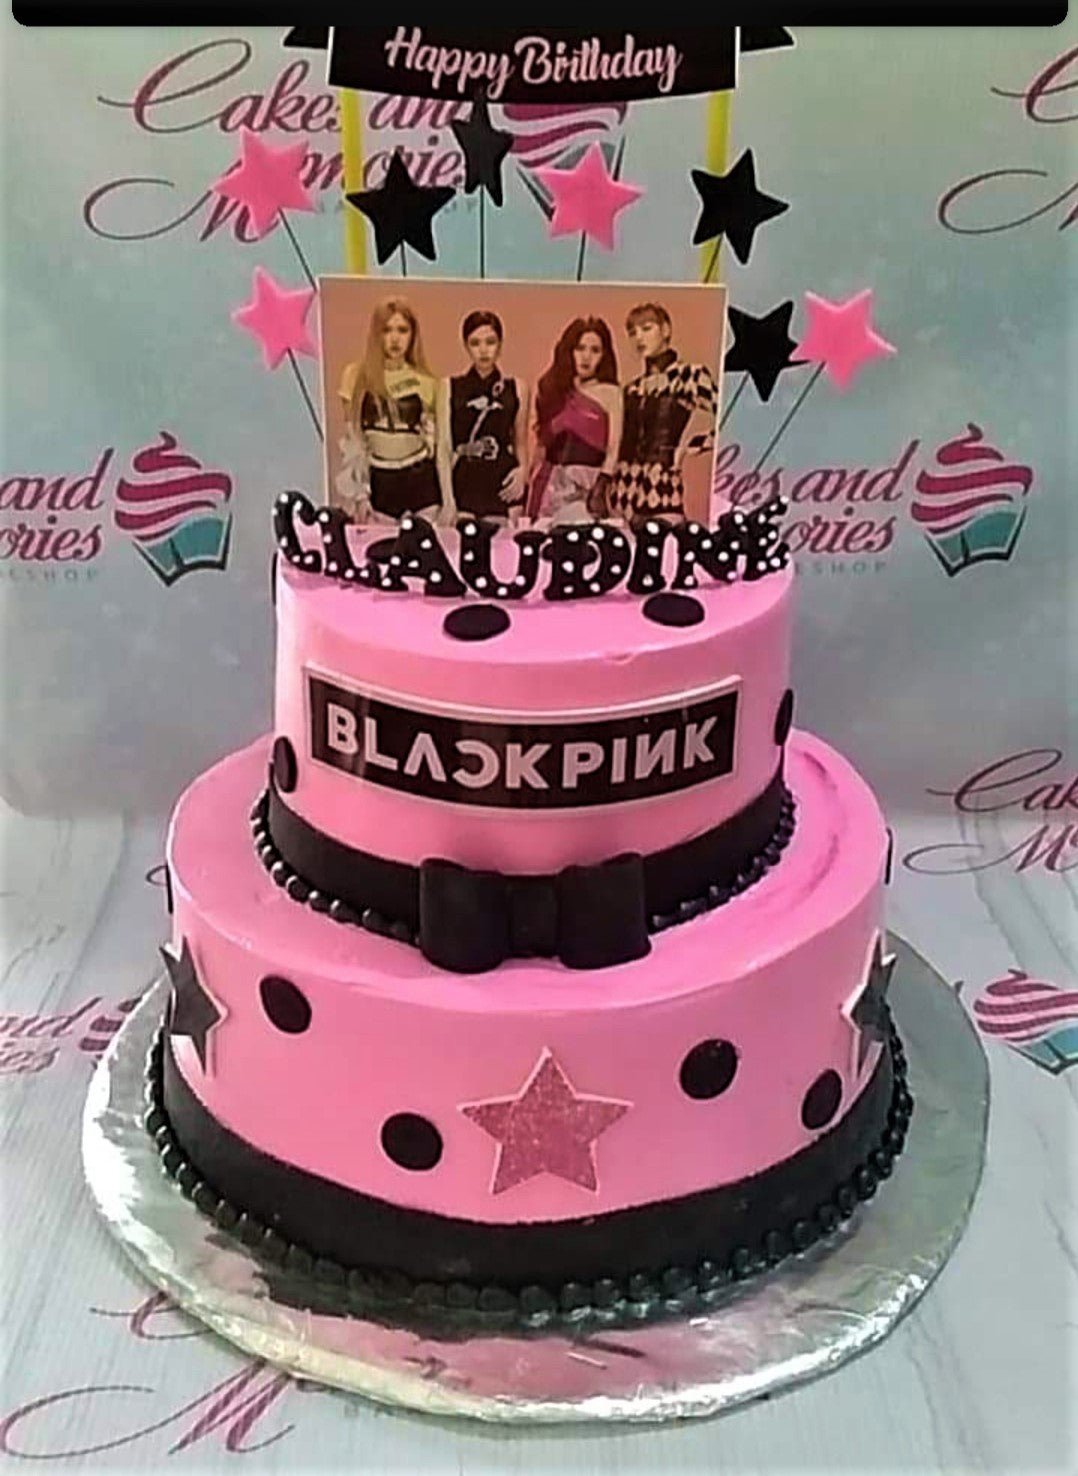 Photos from @lalalalisa_m of @blackpinkofficial 😍 Cake from CAFIE Bakery  (The Powerhouse of Cakes) ❤️ Happy Birthday, Lisa! Thank you… | Instagram